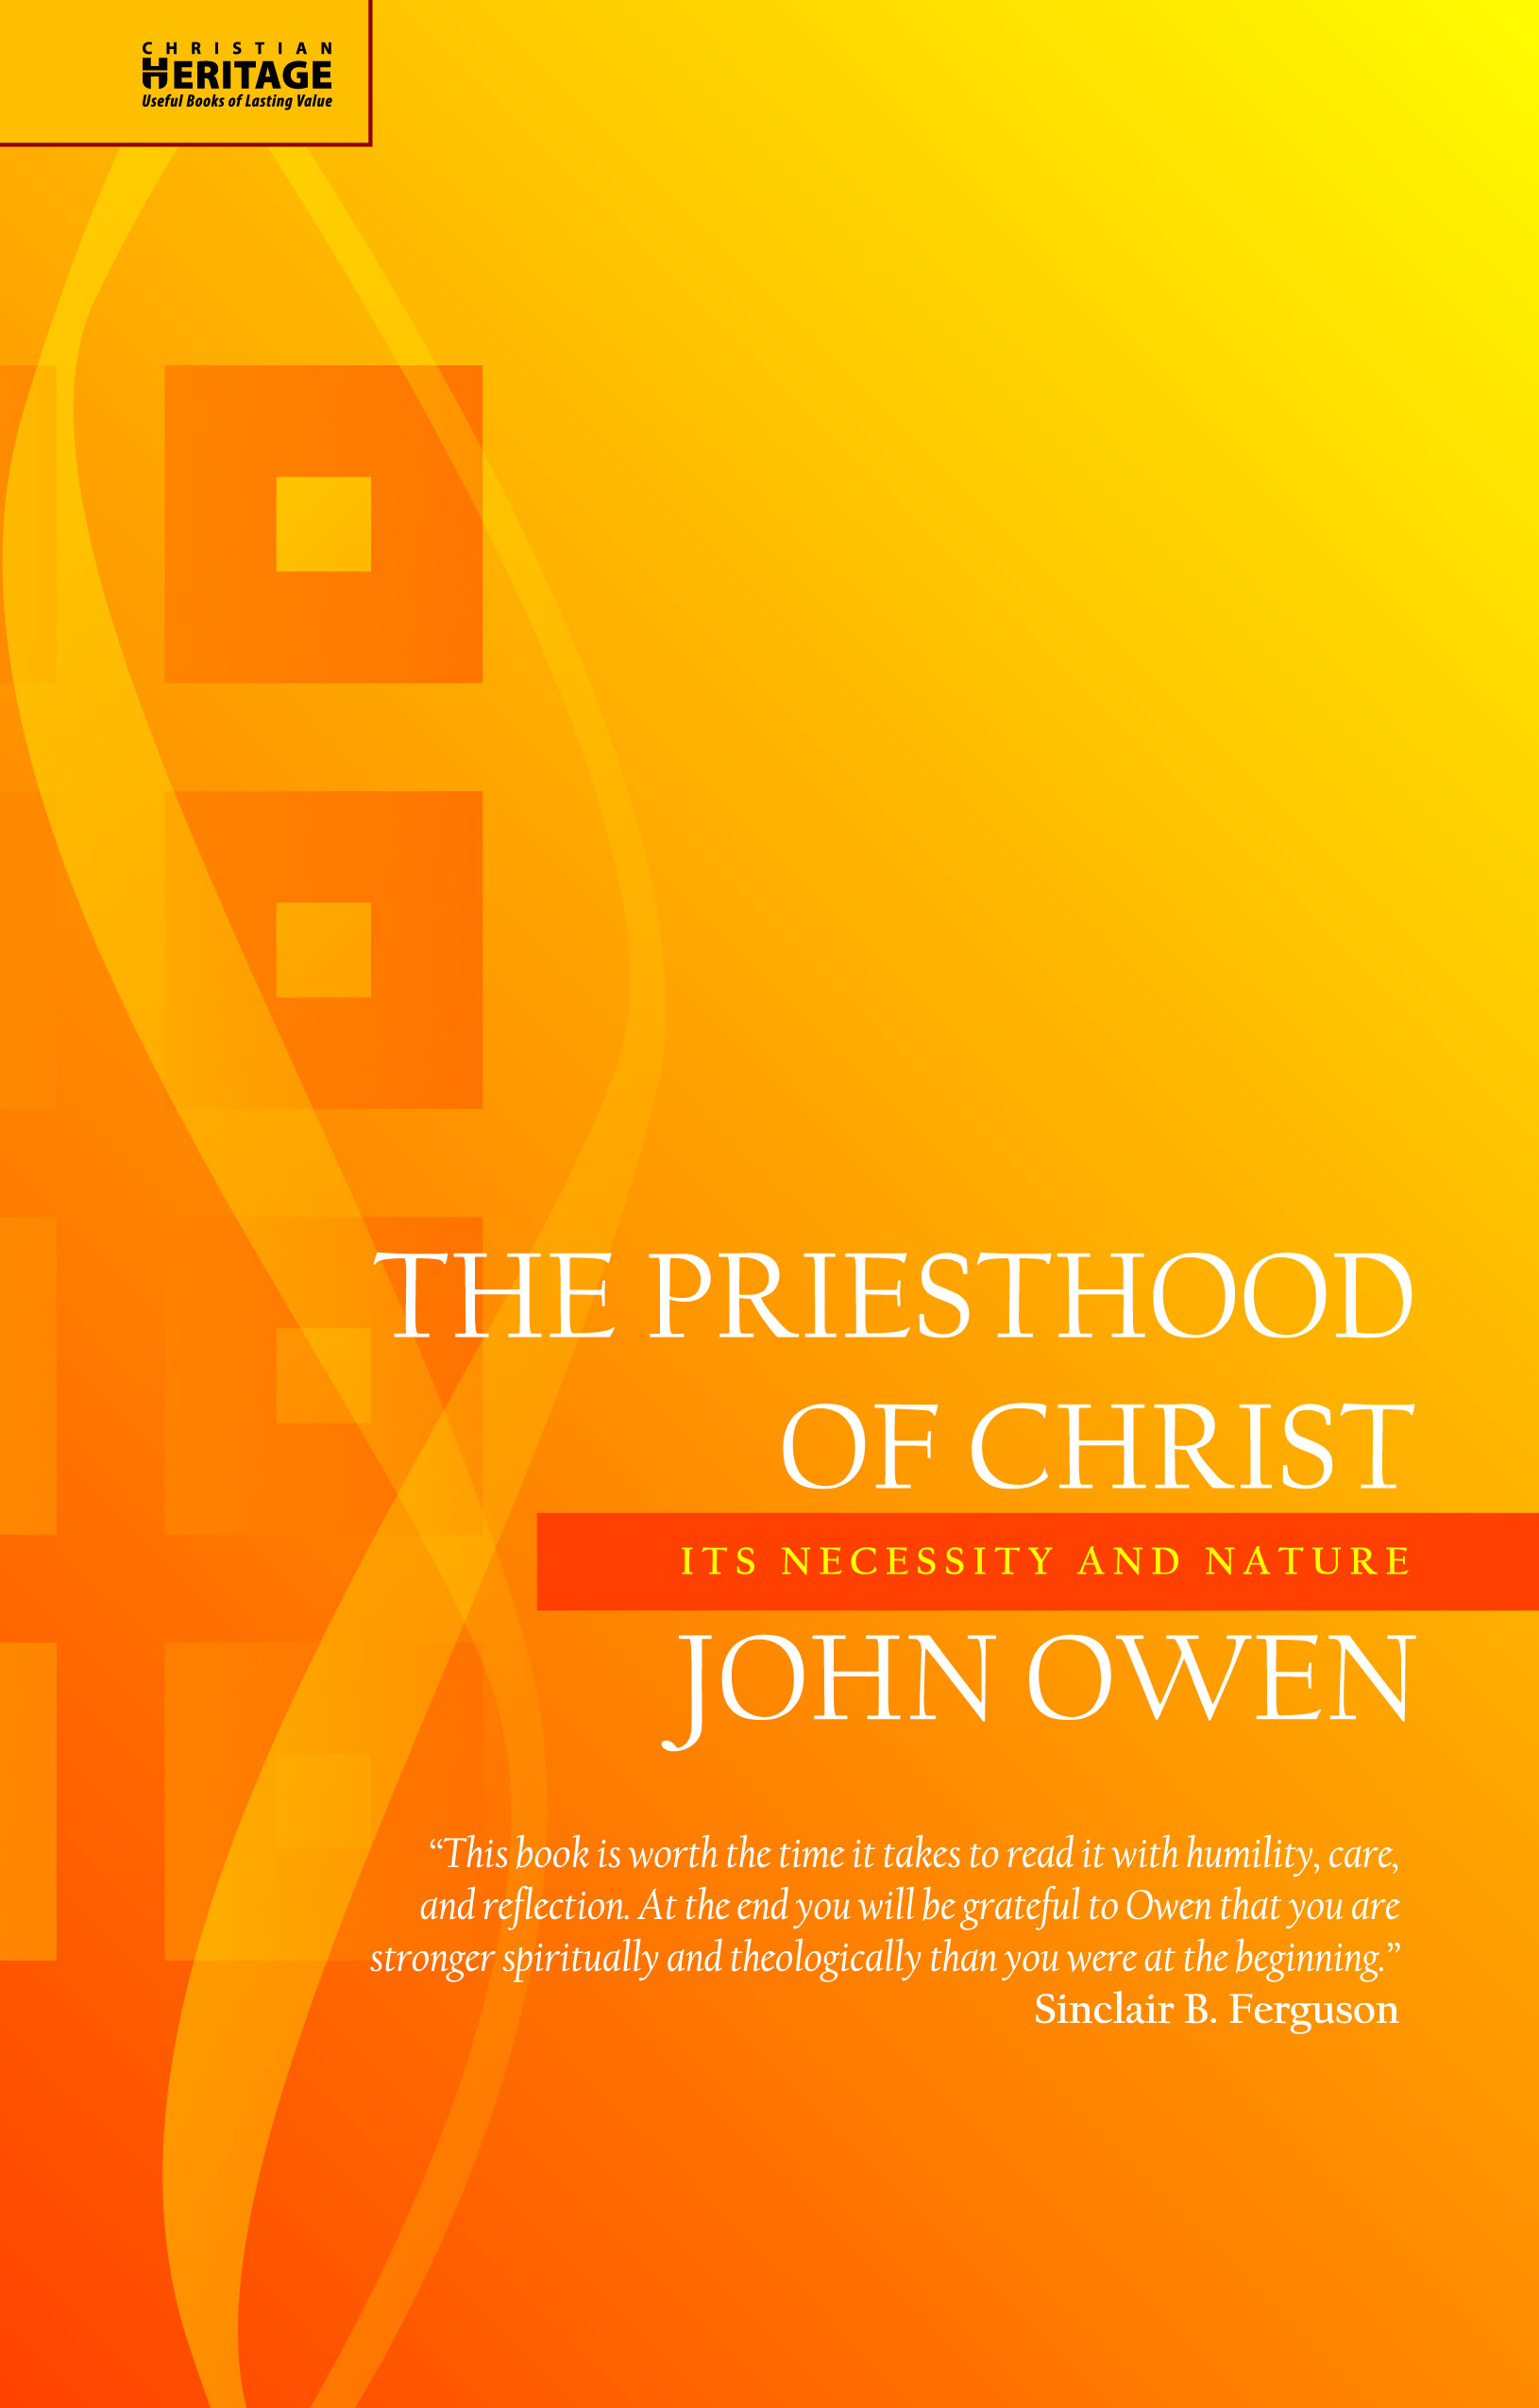 PRIESTHOOD OF CHRIST (THE) - ITS NECESSITY AND NATURE